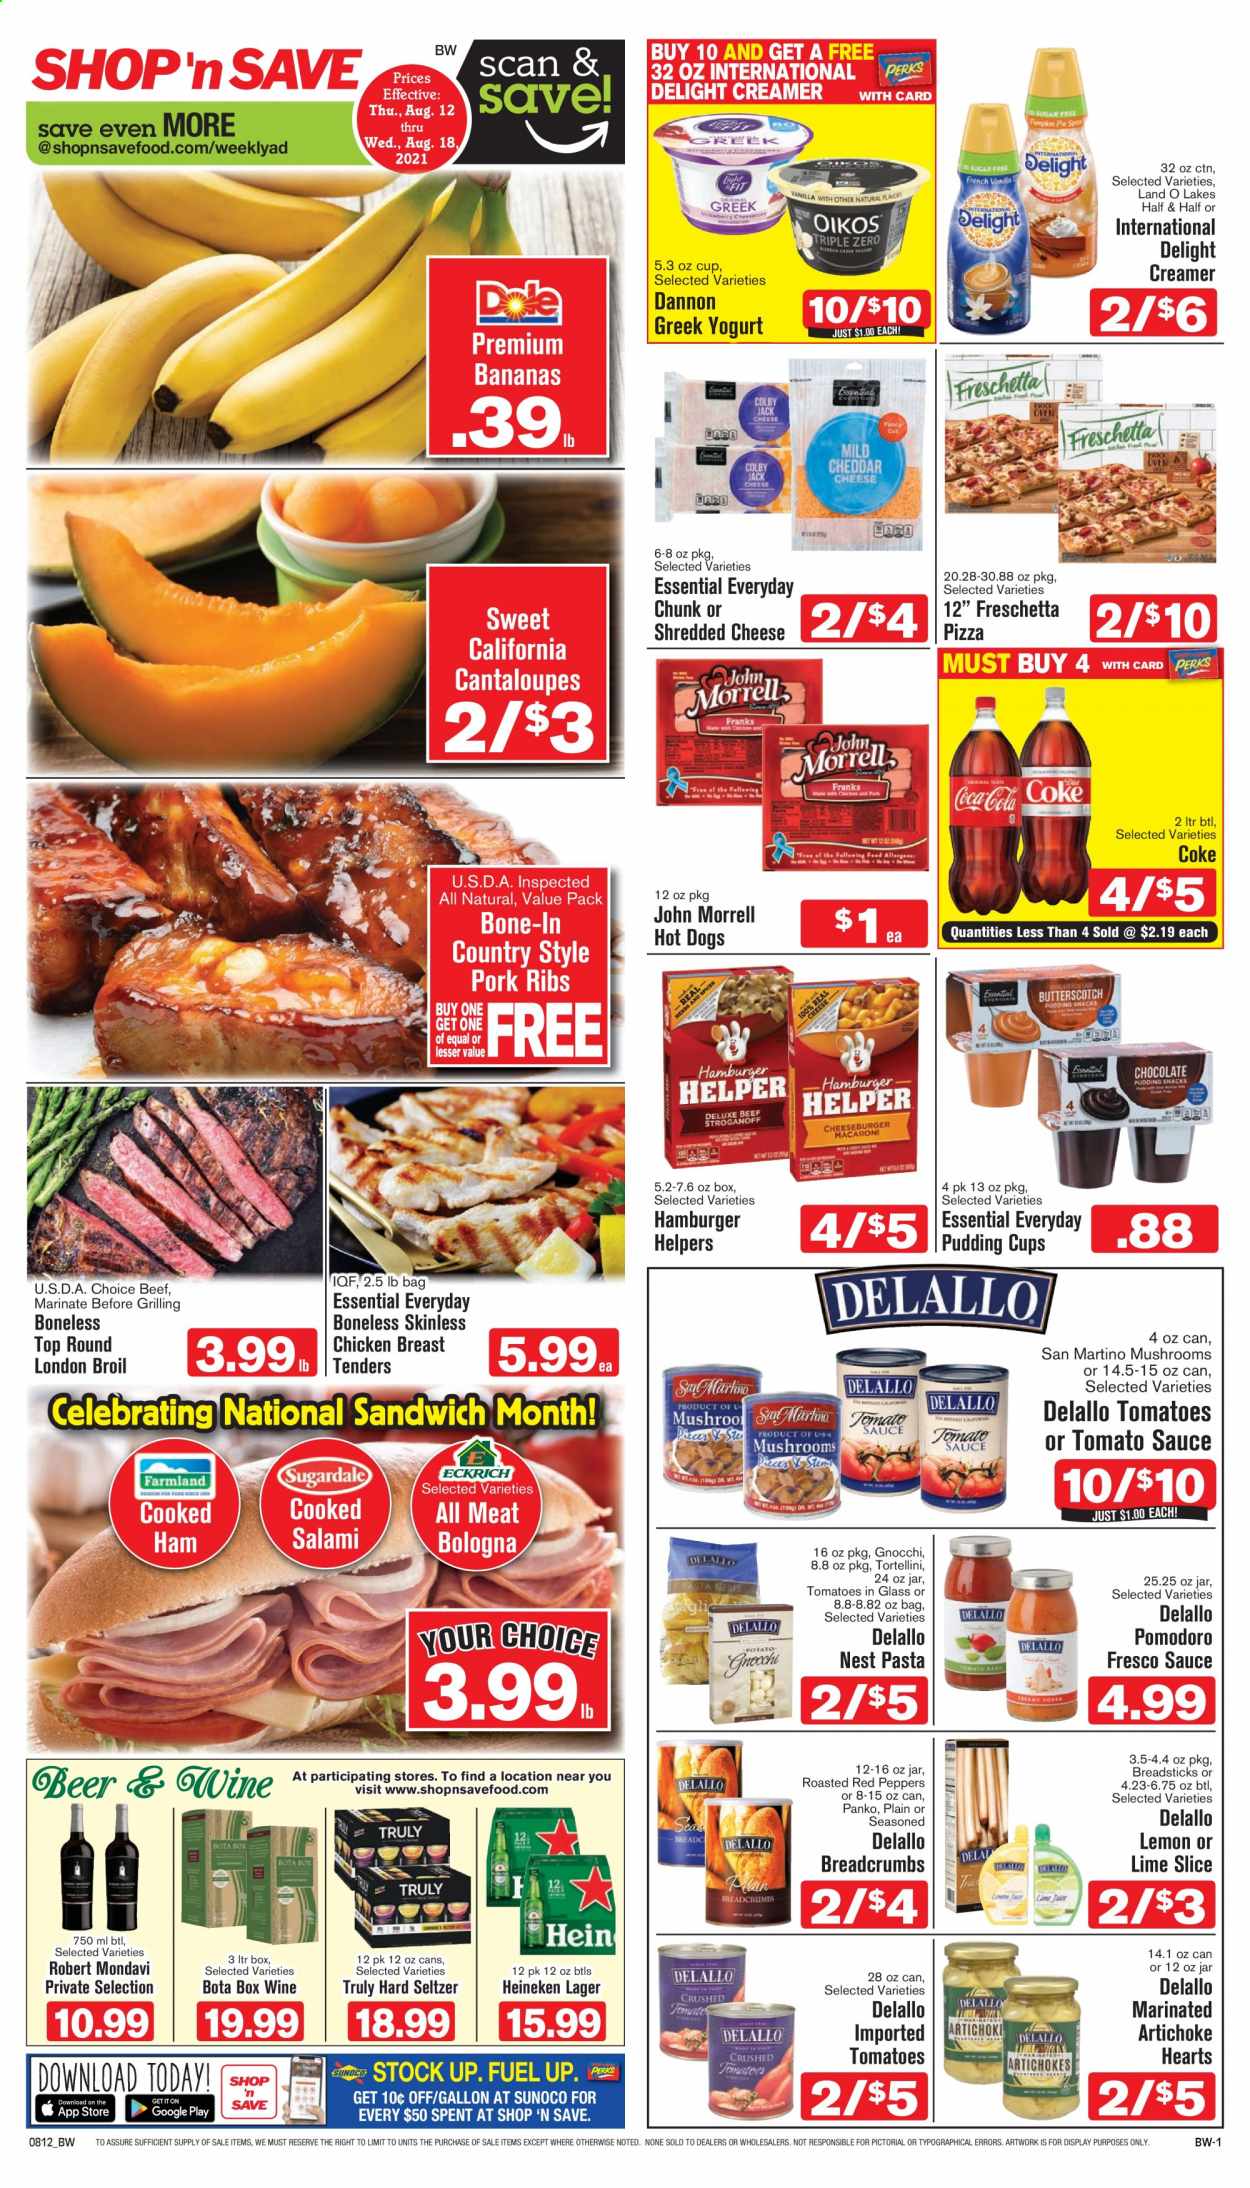 thumbnail - Shop ‘n Save Flyer - 08/12/2021 - 08/18/2021 - Sales products - breadcrumbs, panko breadcrumbs, artichoke, cantaloupe, peppers, red peppers, bananas, chicken tenders, hamburger, pork meat, pork ribs, gnocchi, hot dog, pizza, sandwich, pasta, sauce, tortellini, cooked ham, salami, ham, shredded cheese, greek yoghurt, pudding, yoghurt, Dannon, creamer, bread sticks, tomato sauce, Coca-Cola, Hard Seltzer, TRULY, beer, Heineken, Lager, Half and half. Page 1.